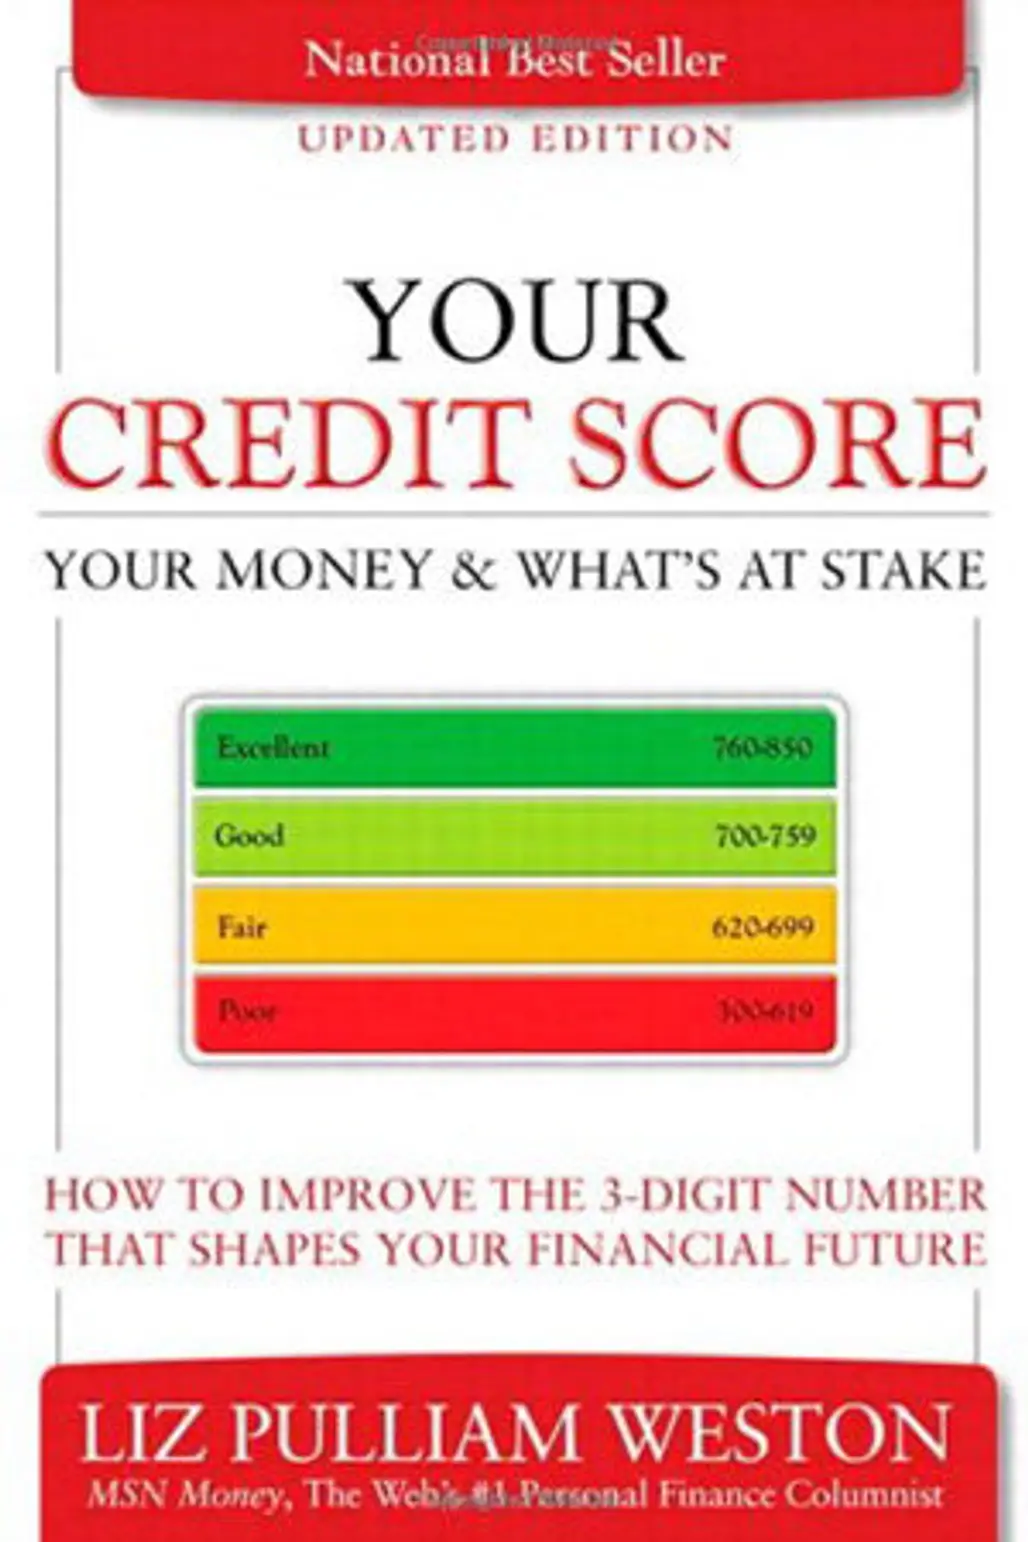 Your Credit Score, Your Money & What's at Stake by Liz Pulliman Weston